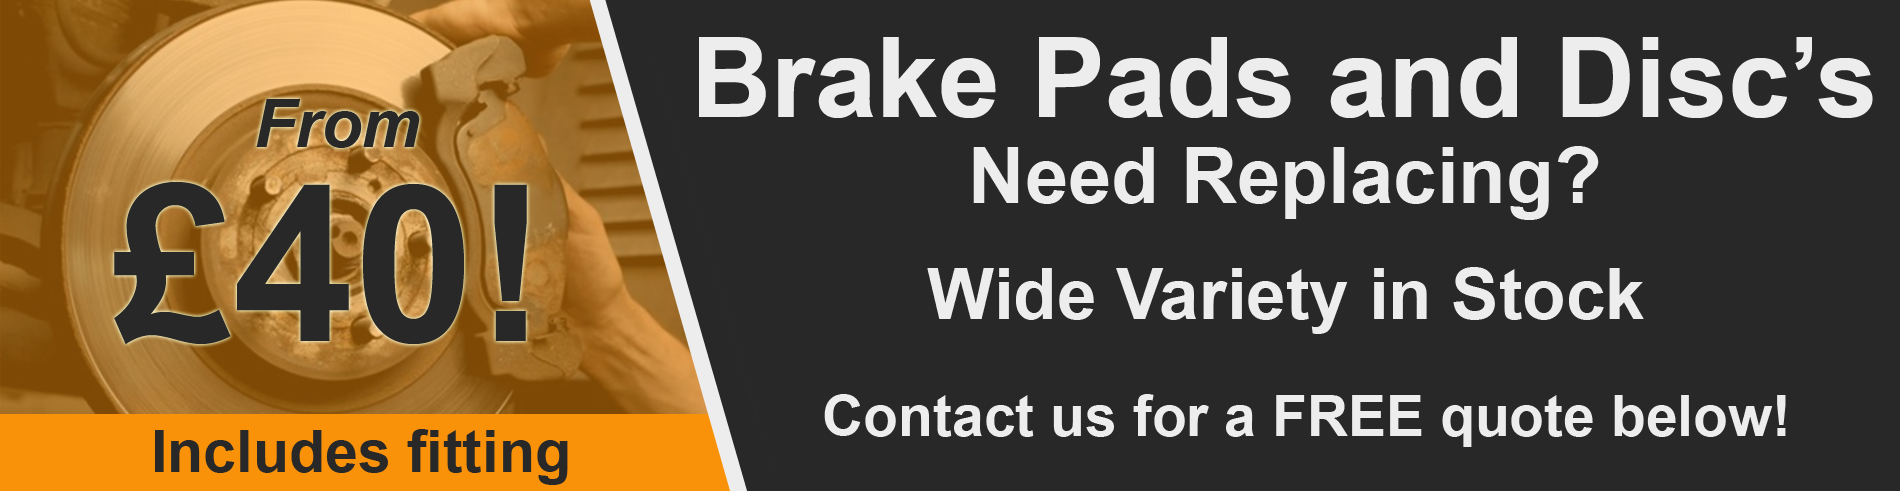 brake pads and discs